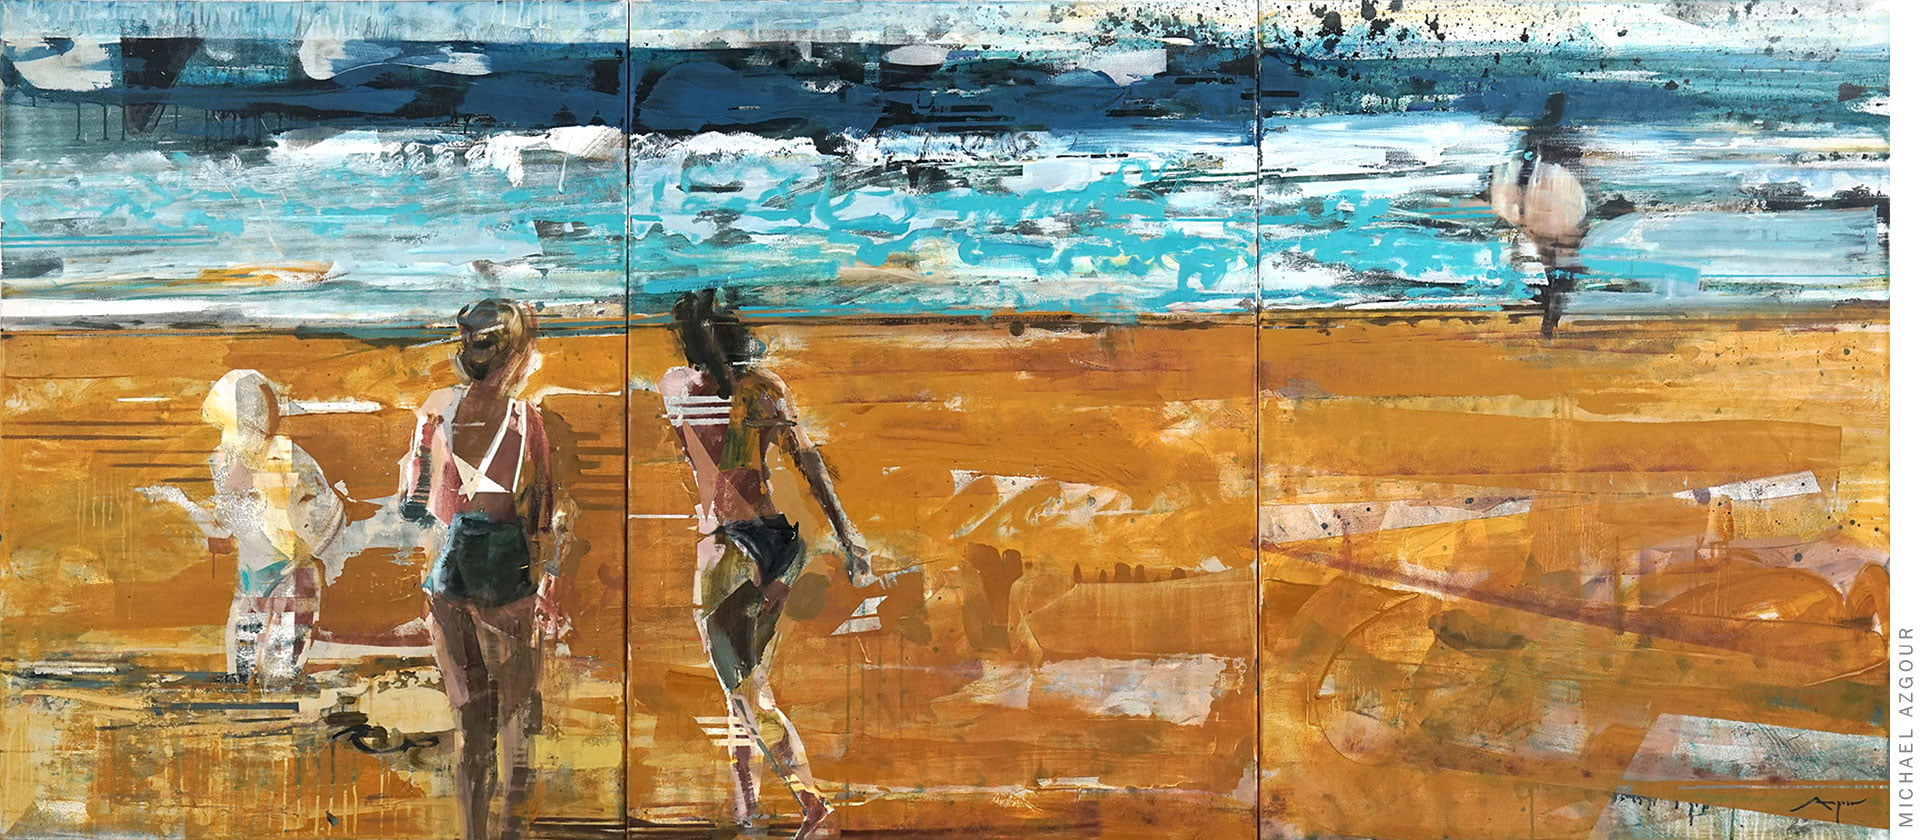 Original painting titled Beach Day depicting women in bikini, beach goers and surfers on the shore. Contemporary artwork by artist Michael Azgour.